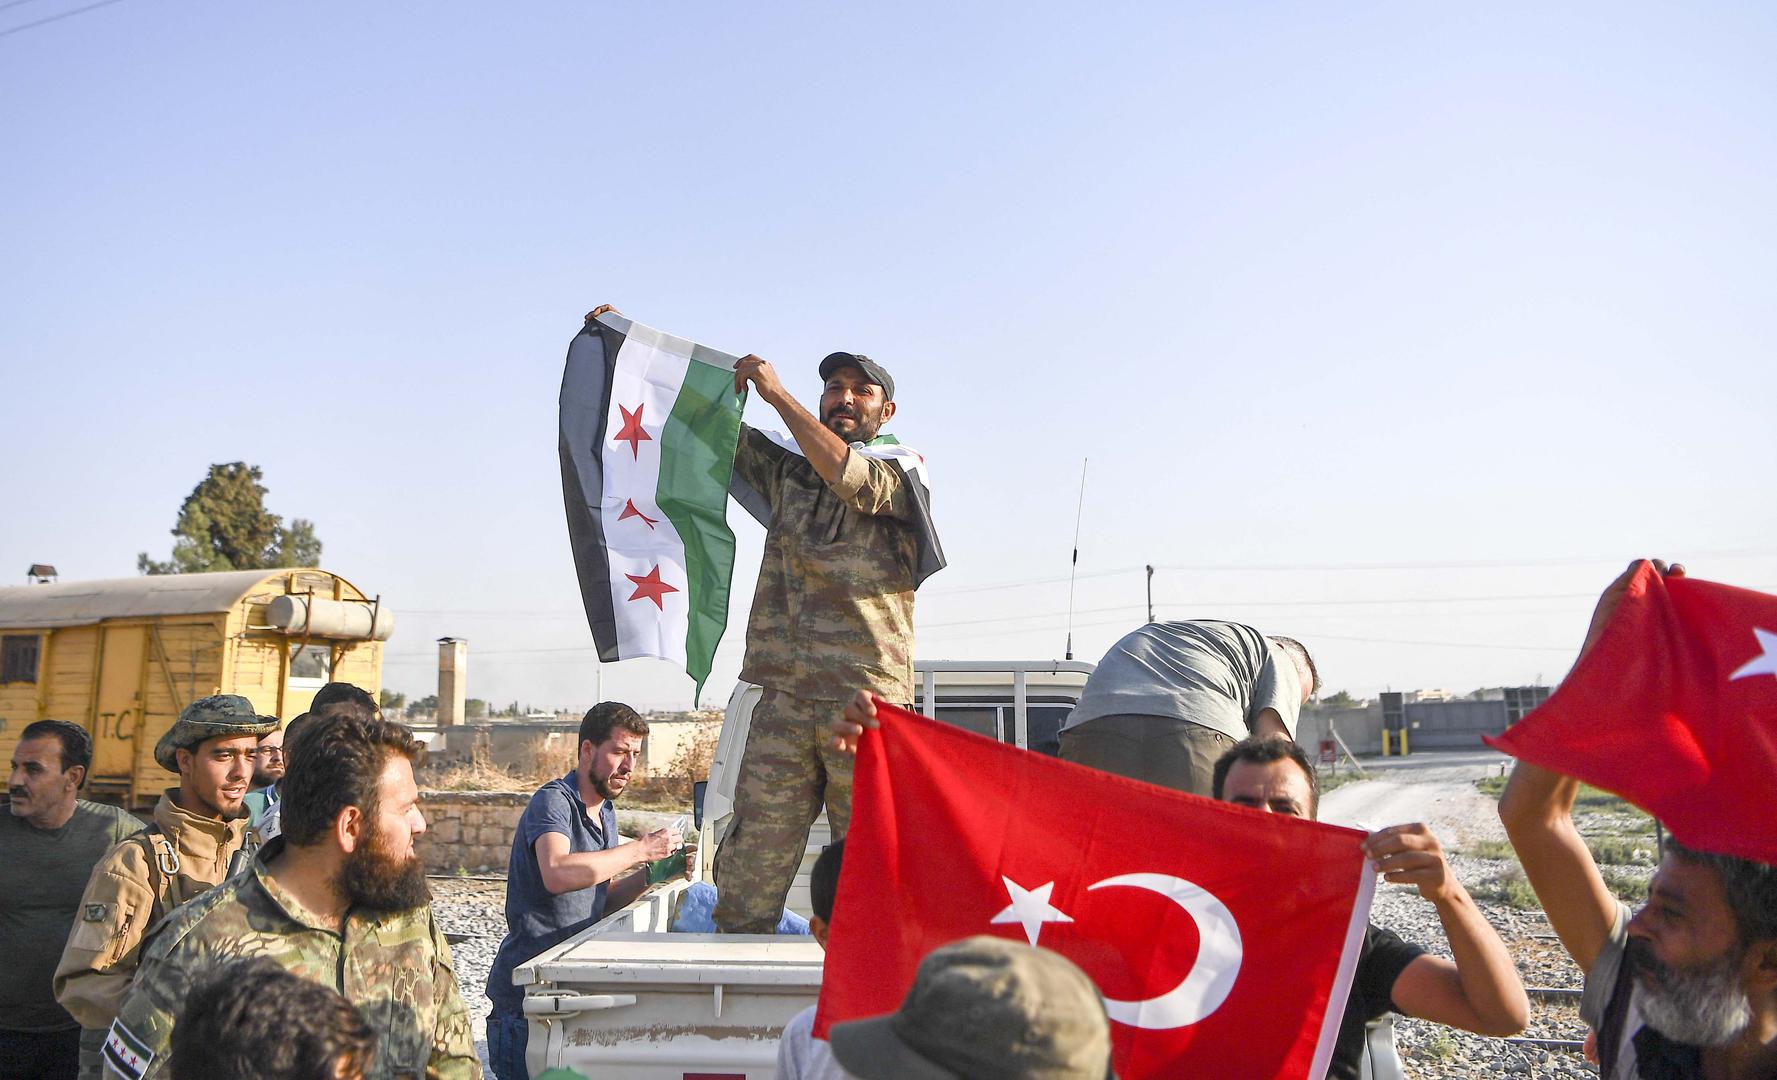 Fighters of the Turkish-backed Free Syrian Army (also called the Syrian National Army) enter the town of Tal Abyad.